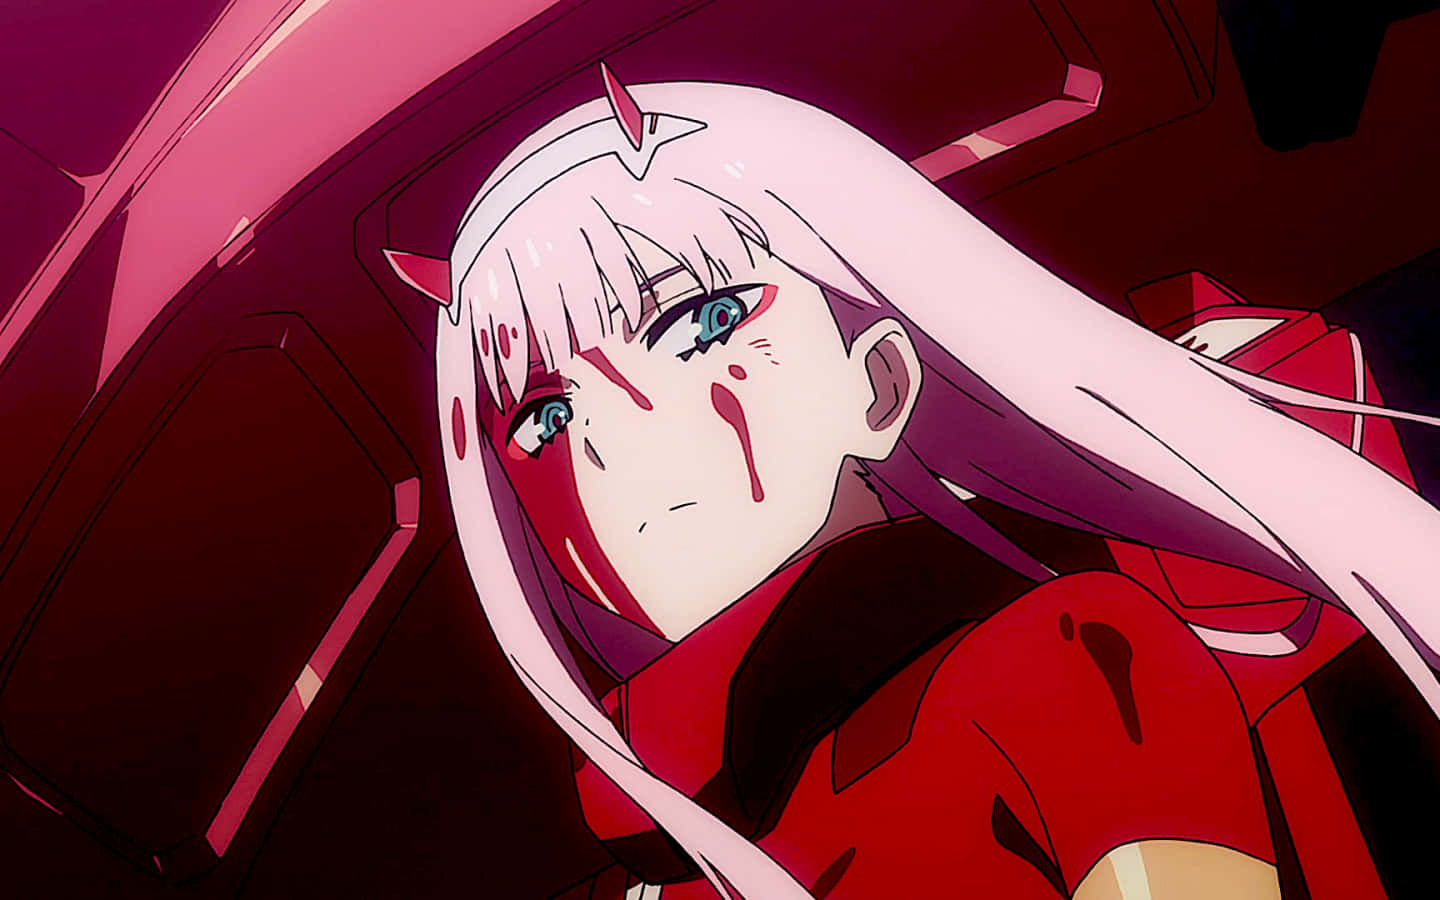 Two unlikely heroes, Hiro and Zero Two, fly into danger in the action-packed anime series Darling In The Franxx.